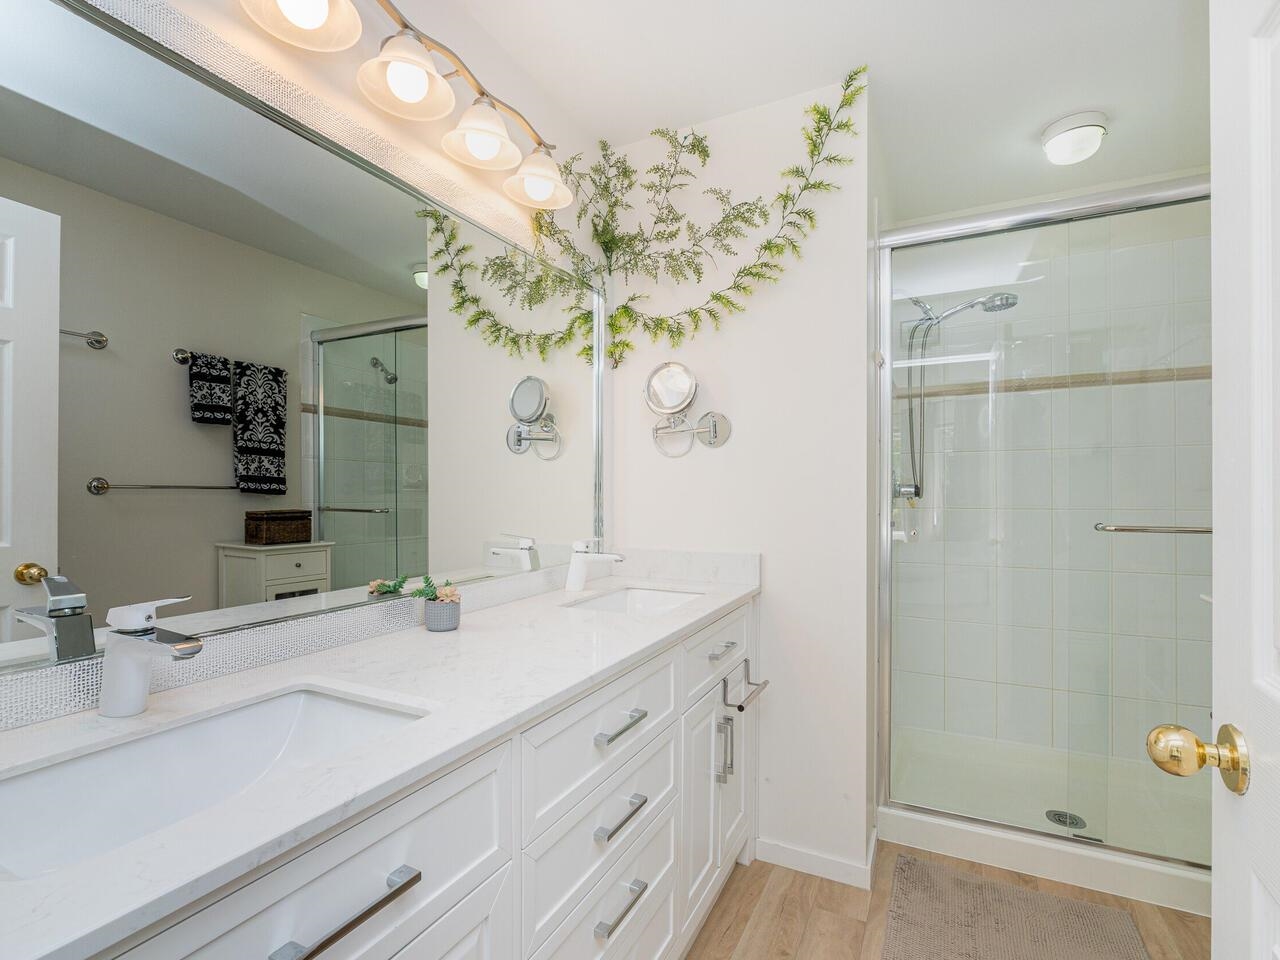 Primary ensuite has dual sinks and walk-in shower